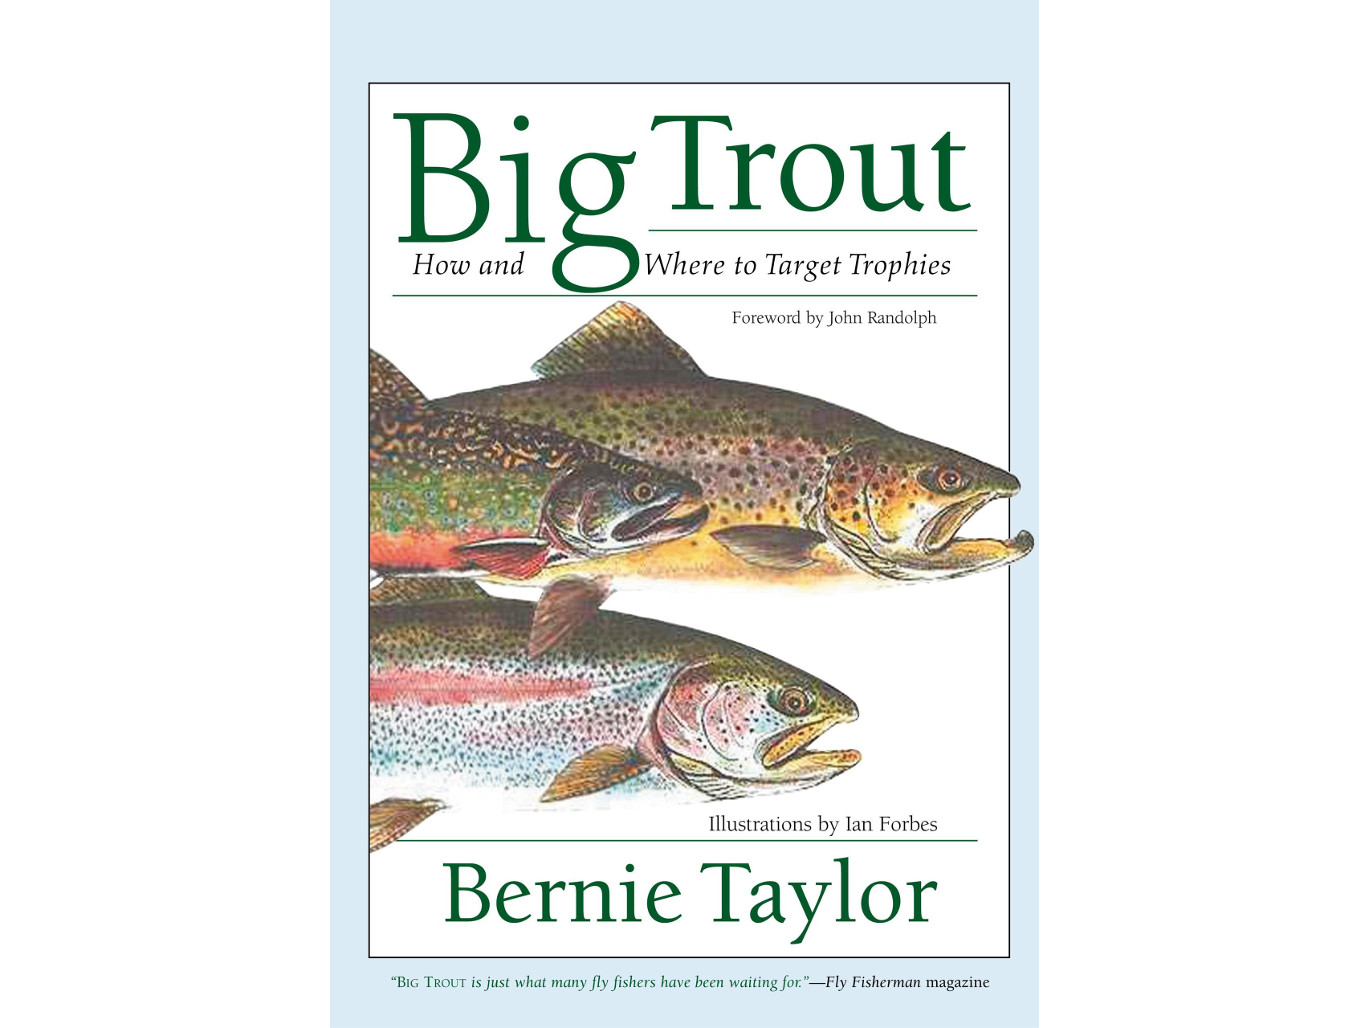 Review of the book Big Trout